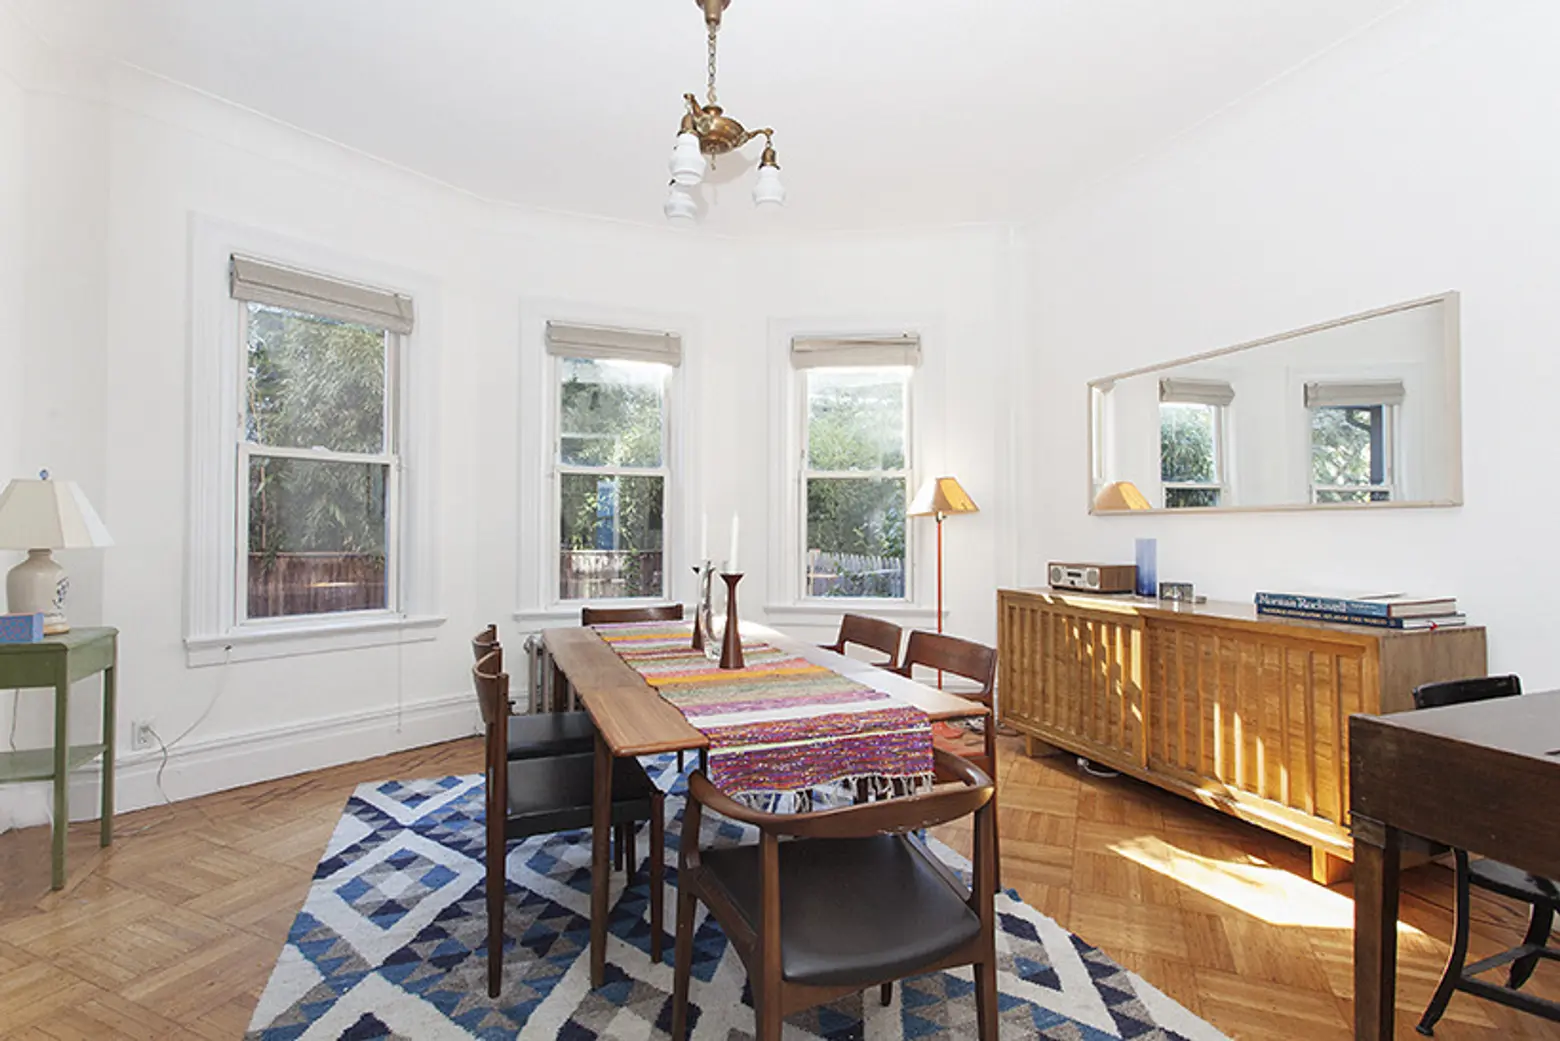 236 Stratford Road, Ditmas Park Victorian, Aaron Dessner, The National